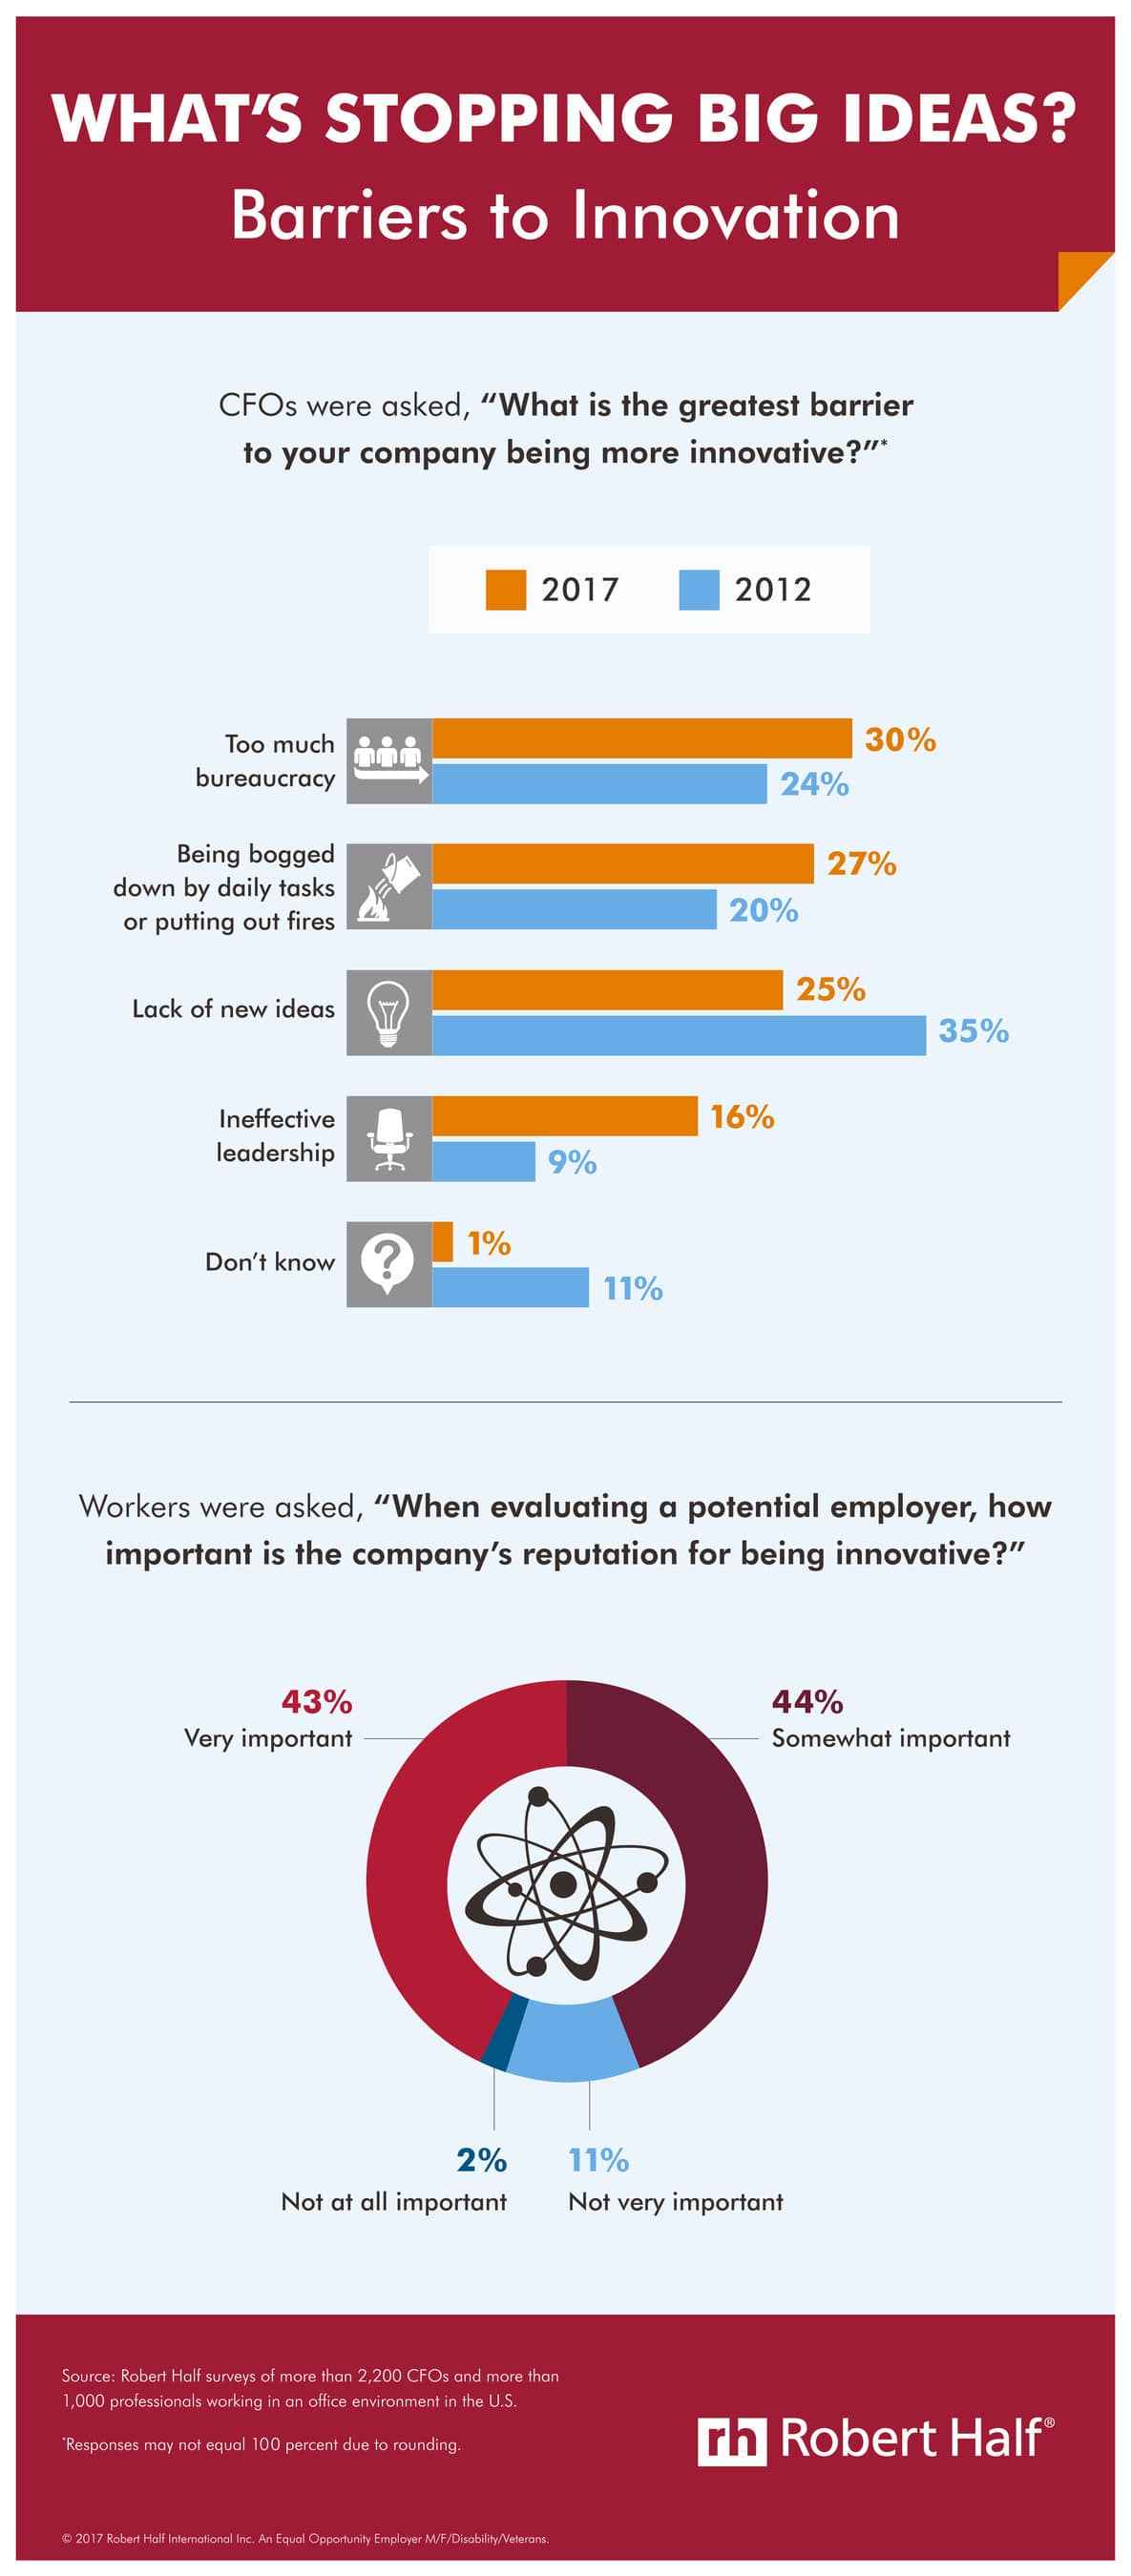 Are managers their own biggest barriers to innovation?